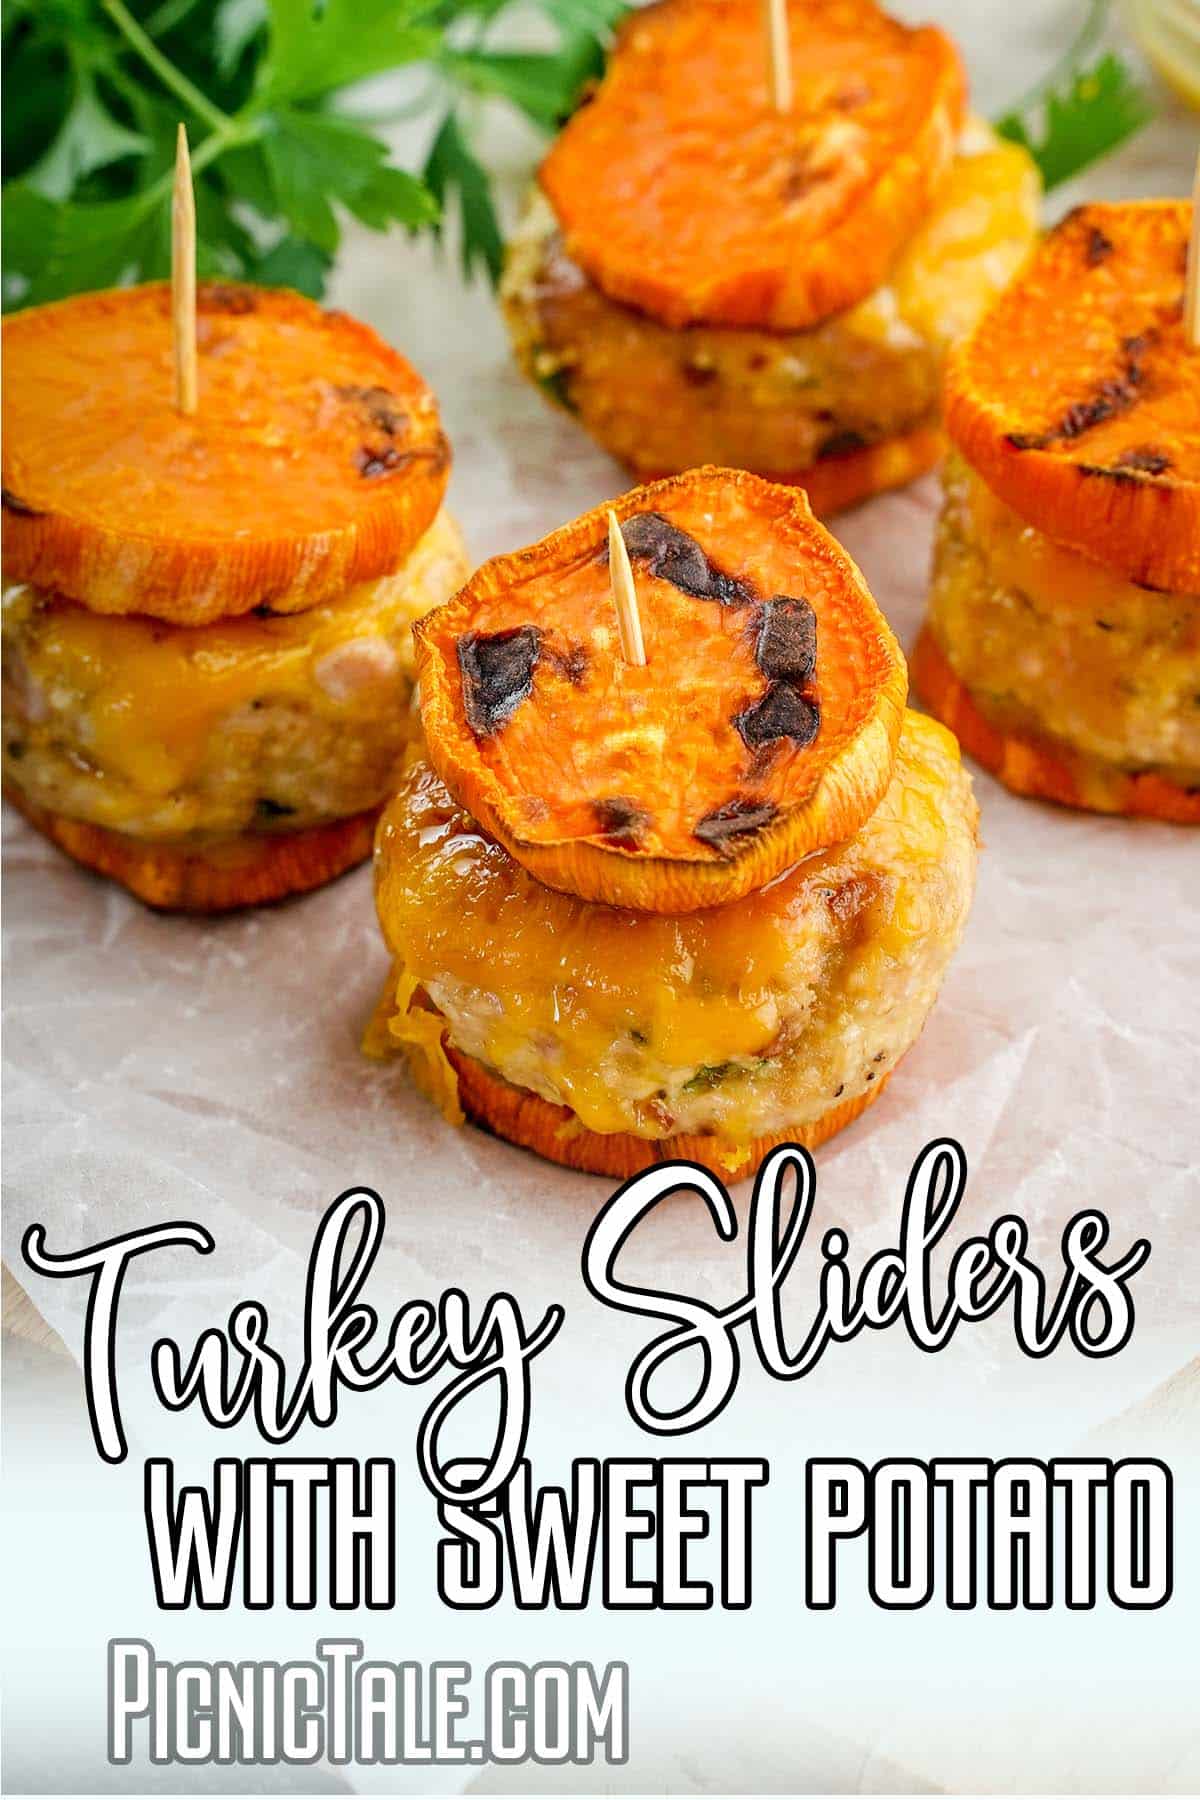 Turkey Sliders with Sweet Potato, Stacked Four on white Paper, parsley and Lettering on bottom.